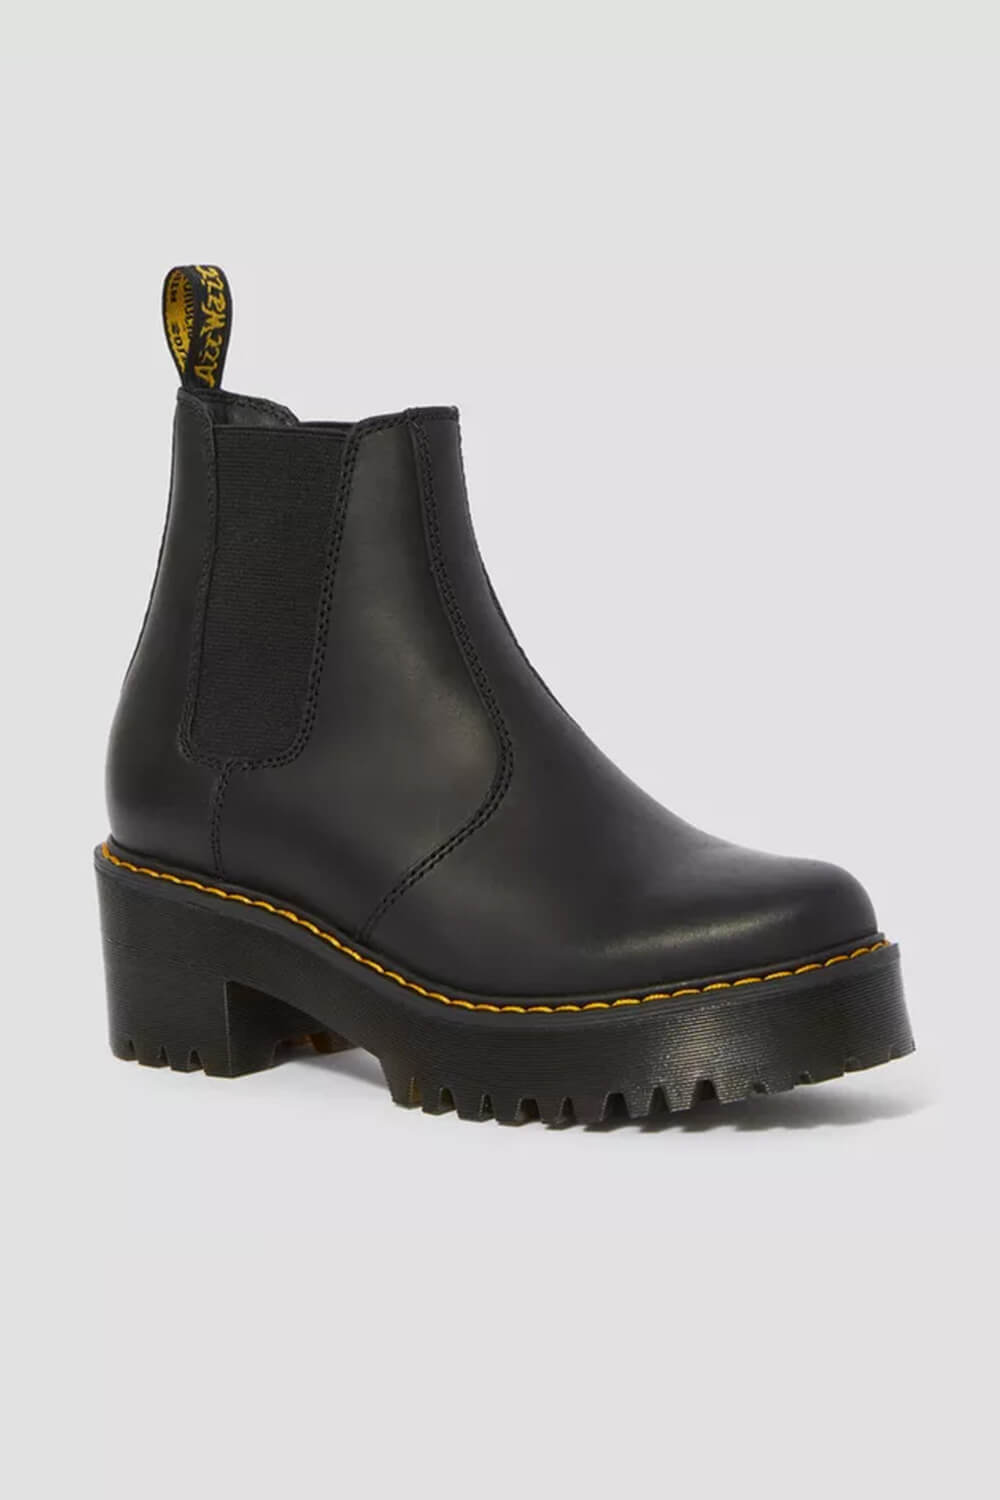 Dr. Martens Women's 2976 Nappa Leather Chelsea Boots, Black